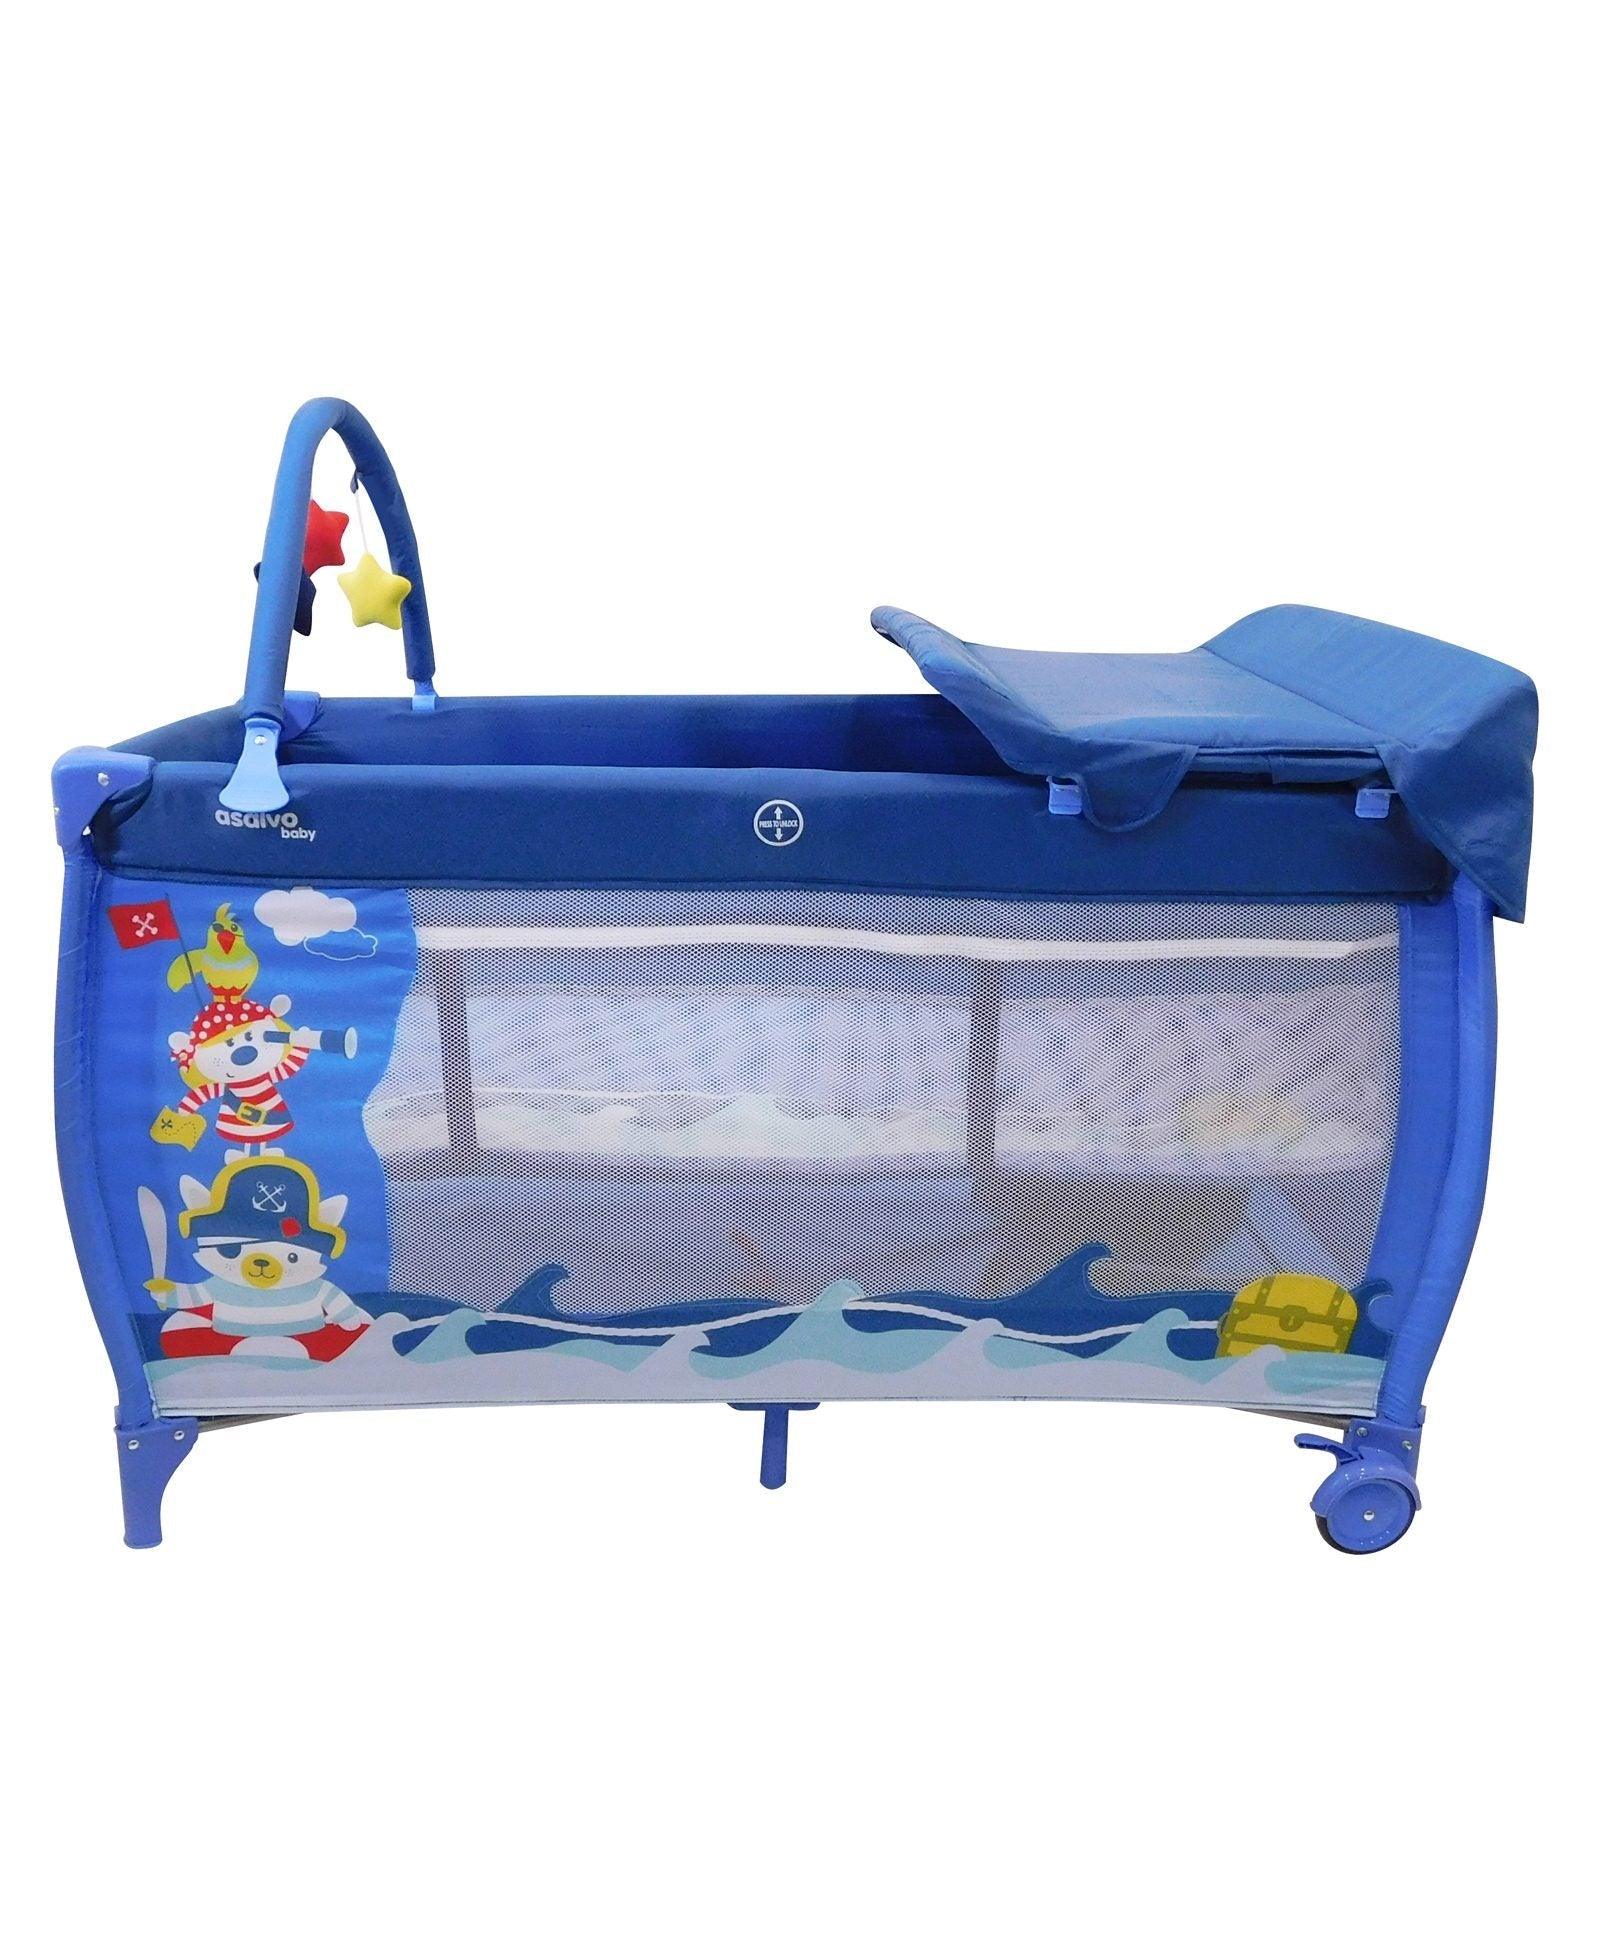 PATOYS | Asalvo 14788 Travel Cot Complet Adventures - PATOYS